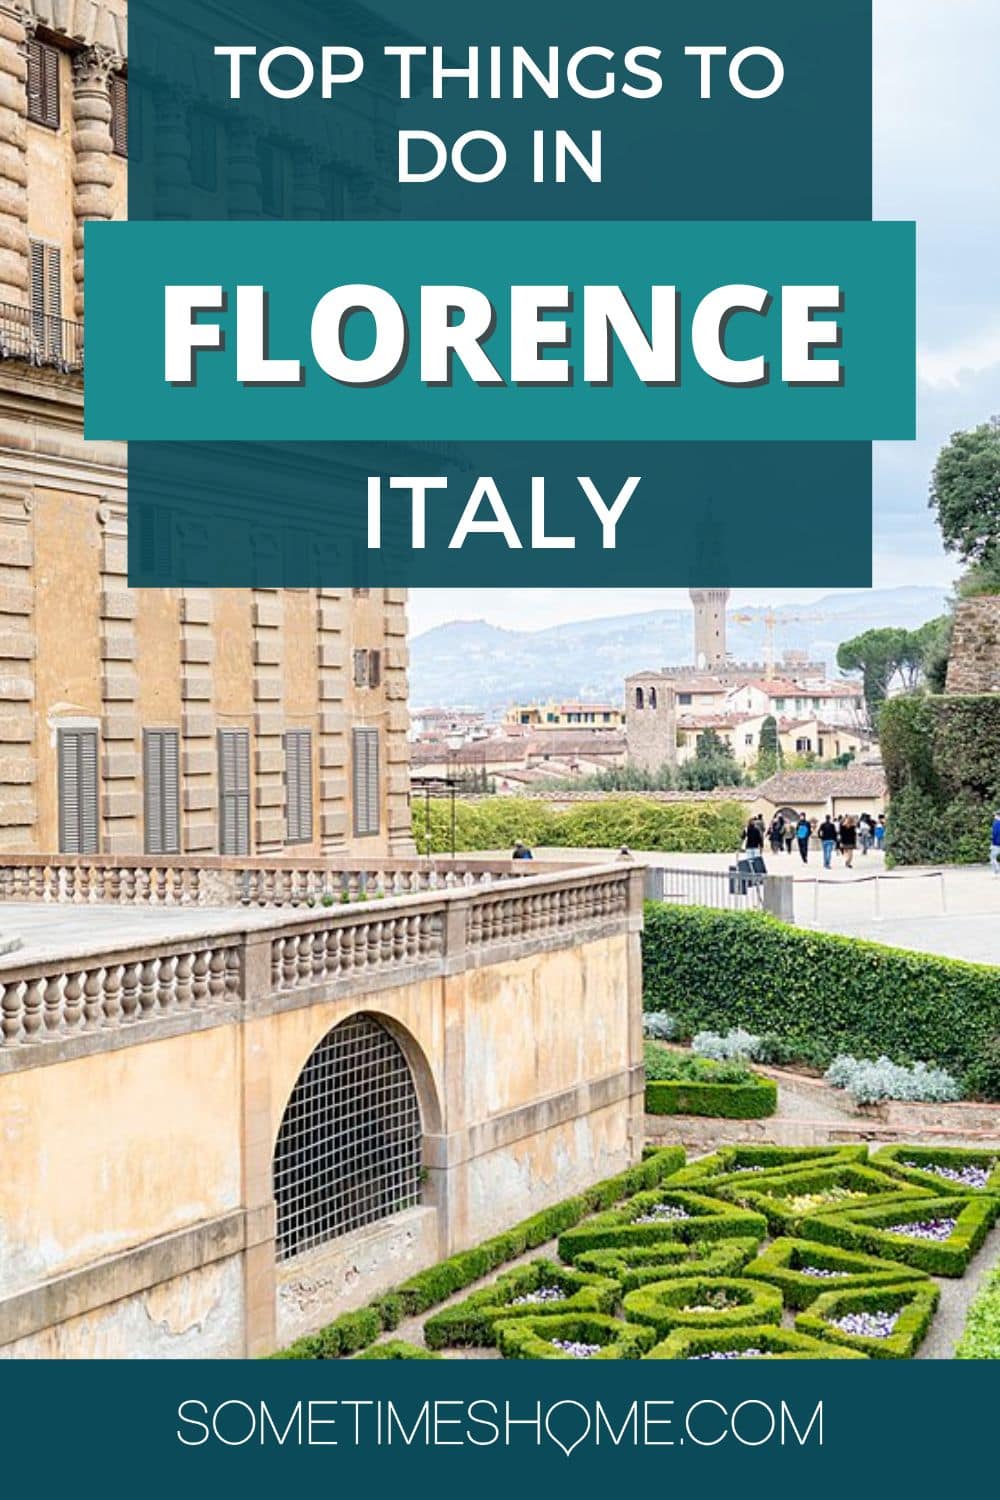 Top things to do in Florence, Italy with a photo of Boboli Gardens.